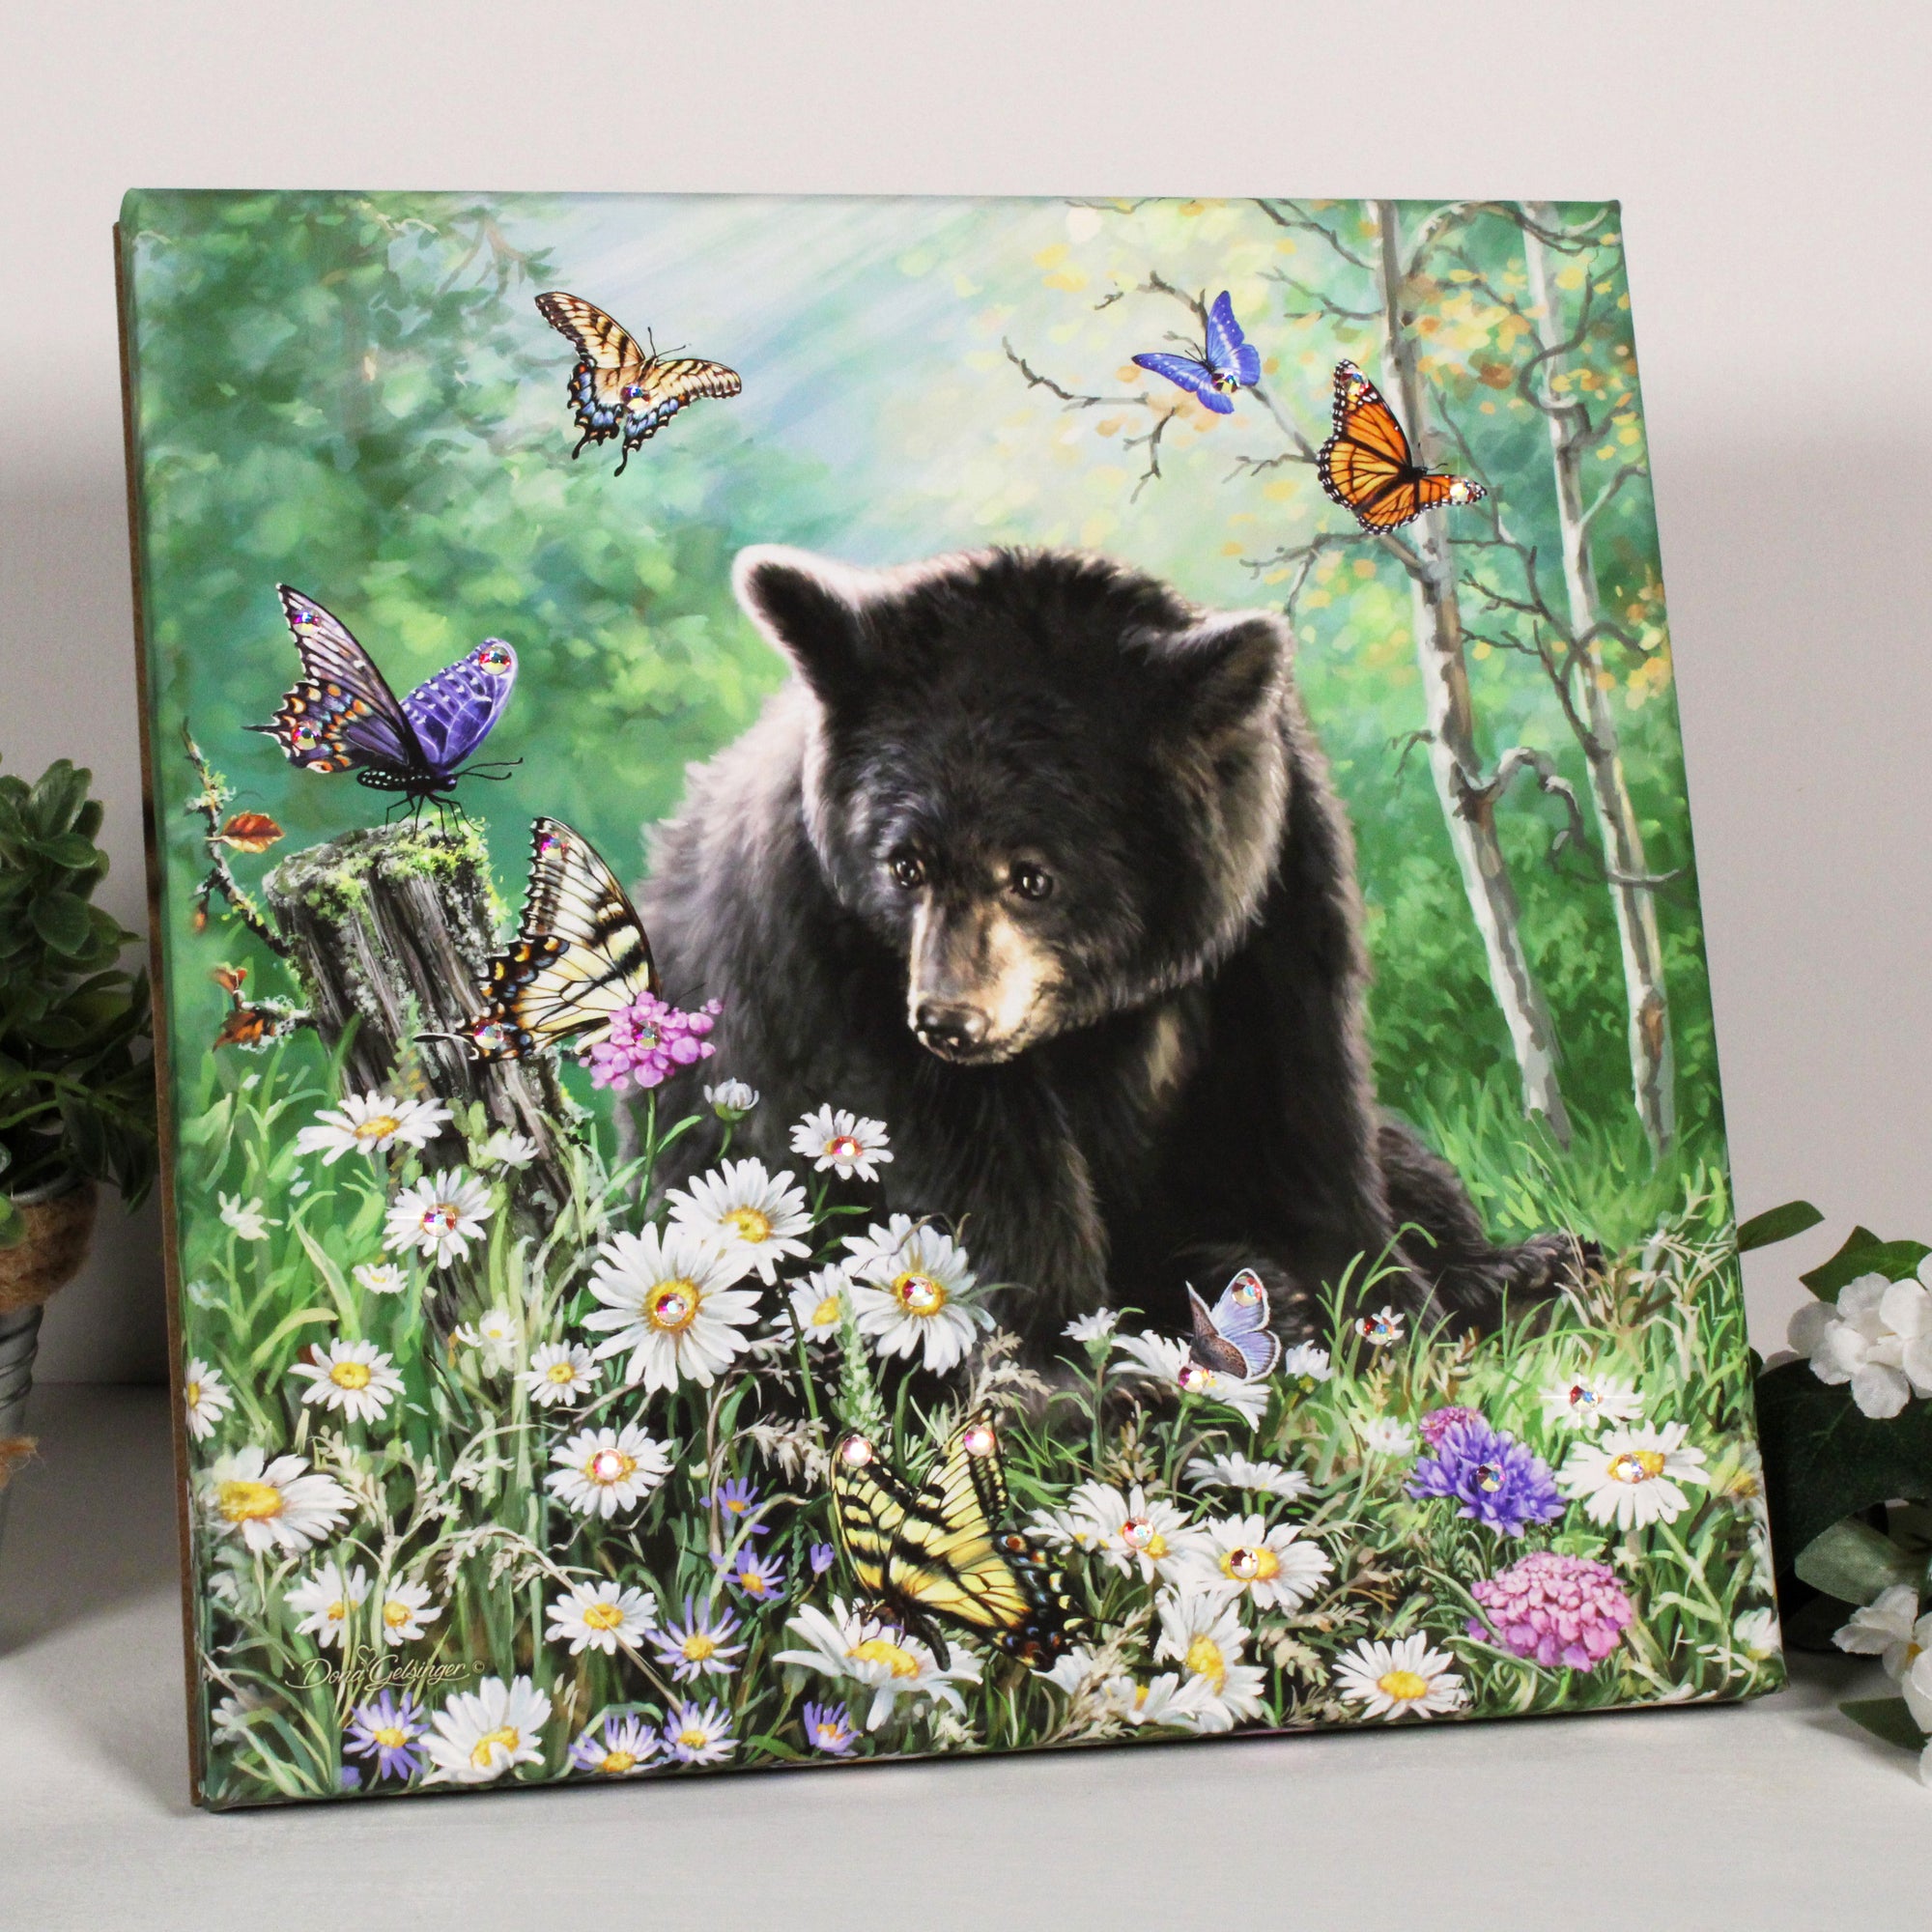  This breathtaking artwork features a majestic black bear, sitting serenely in a field surrounded by a myriad of colorful flowers and delicate butterflies, creating a picture of nature at its most magical.